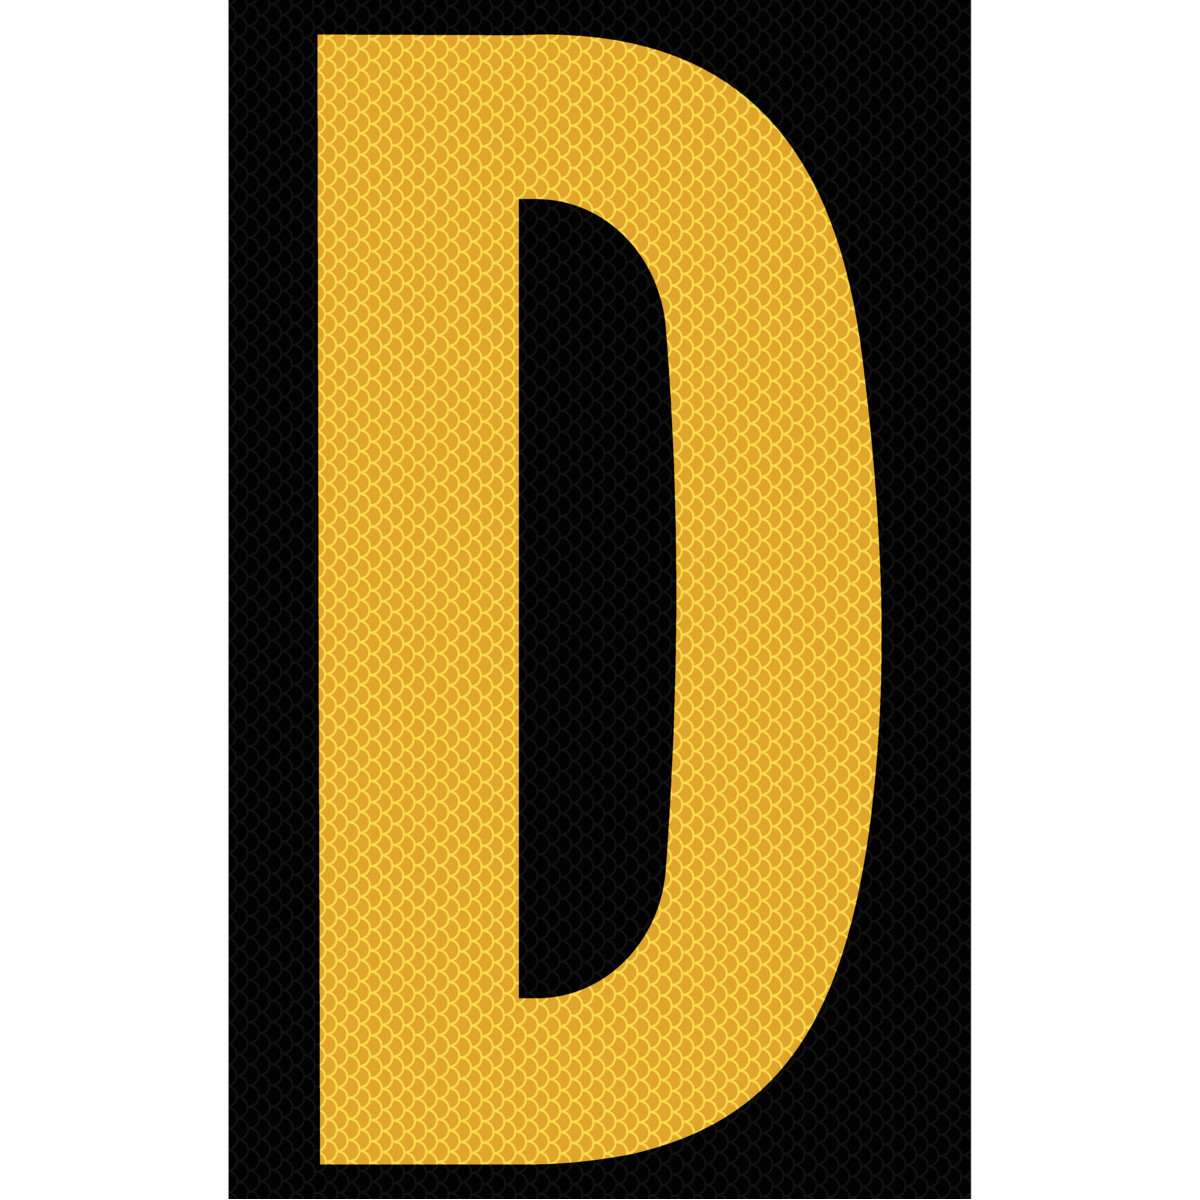 3" Yellow on Black High Intensity Reflective "D"